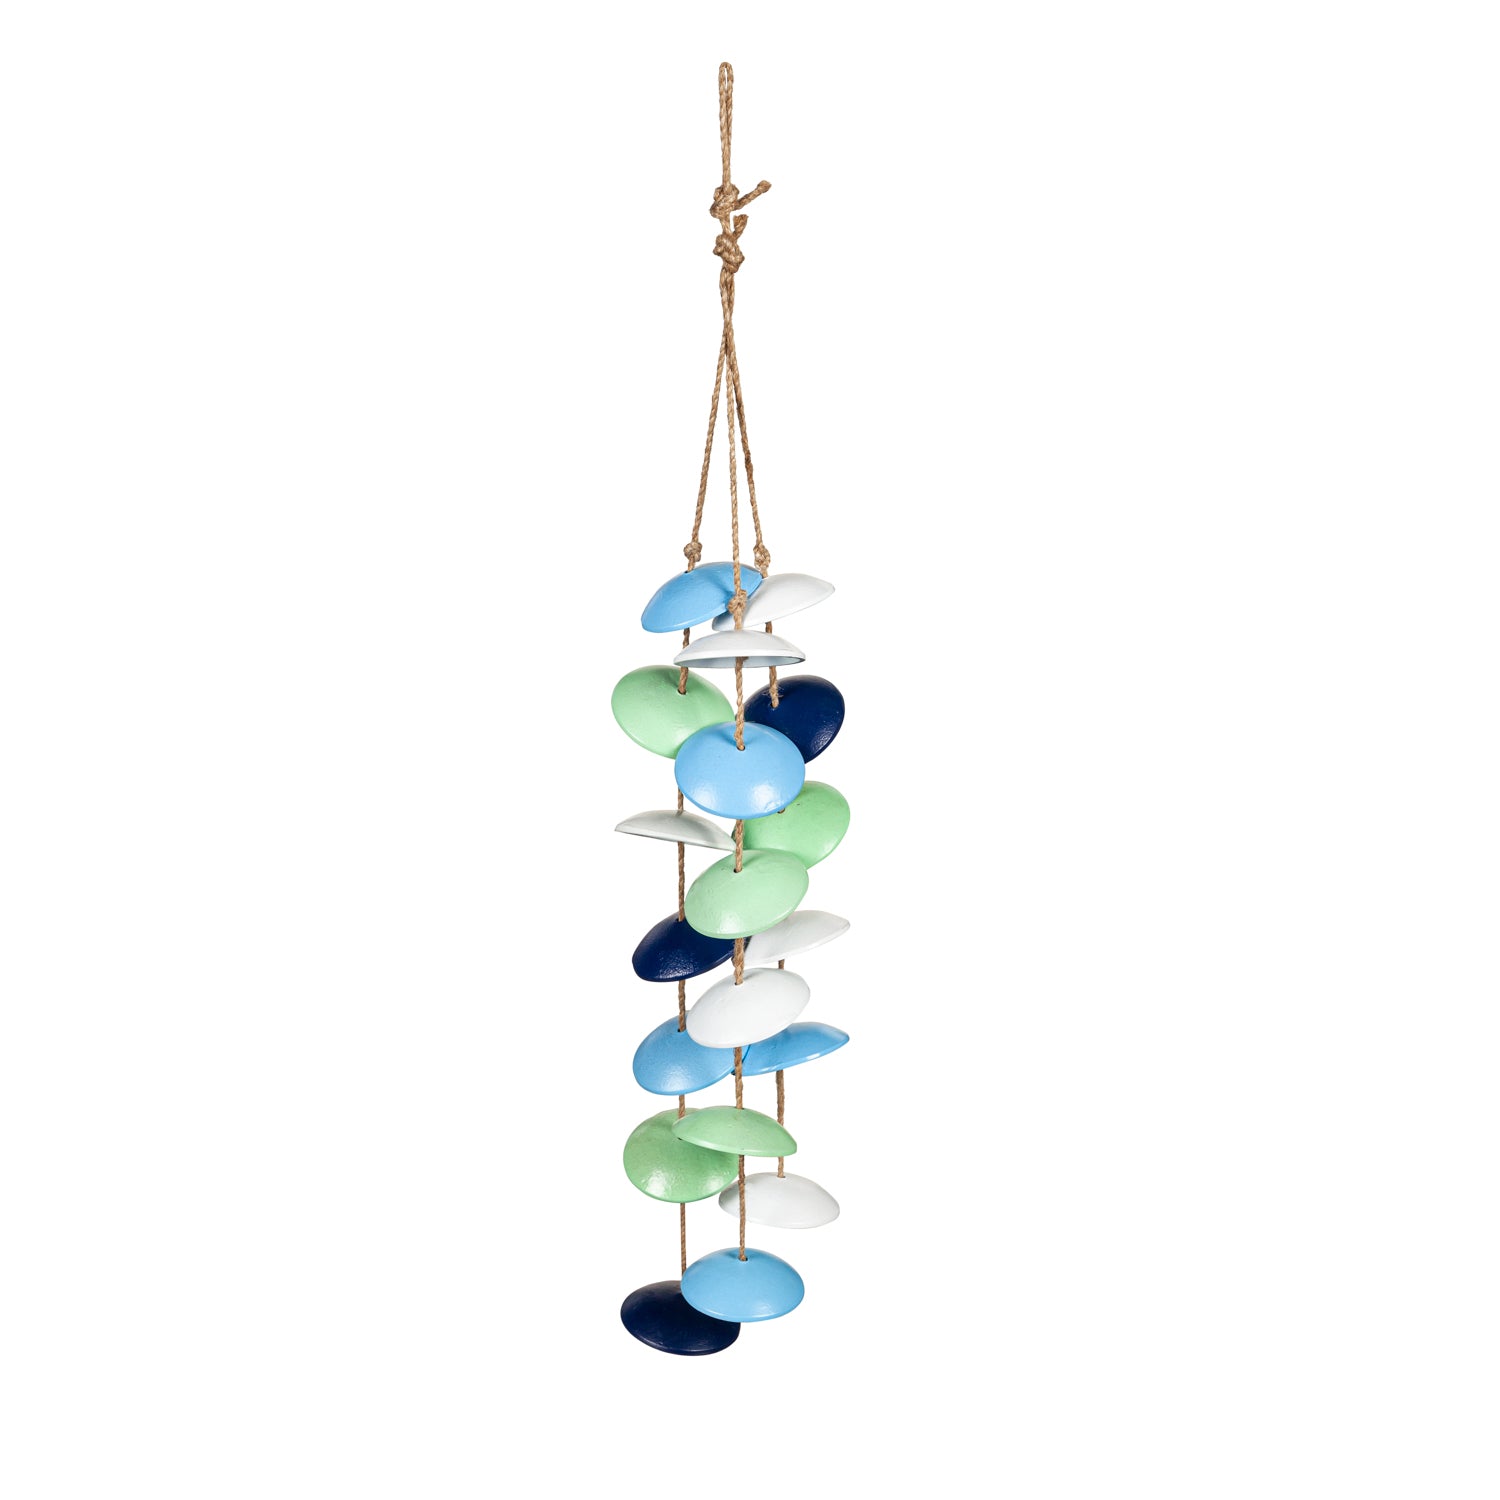 Multi Colored Wind Chime with Jute Rope, Cast Aluminum